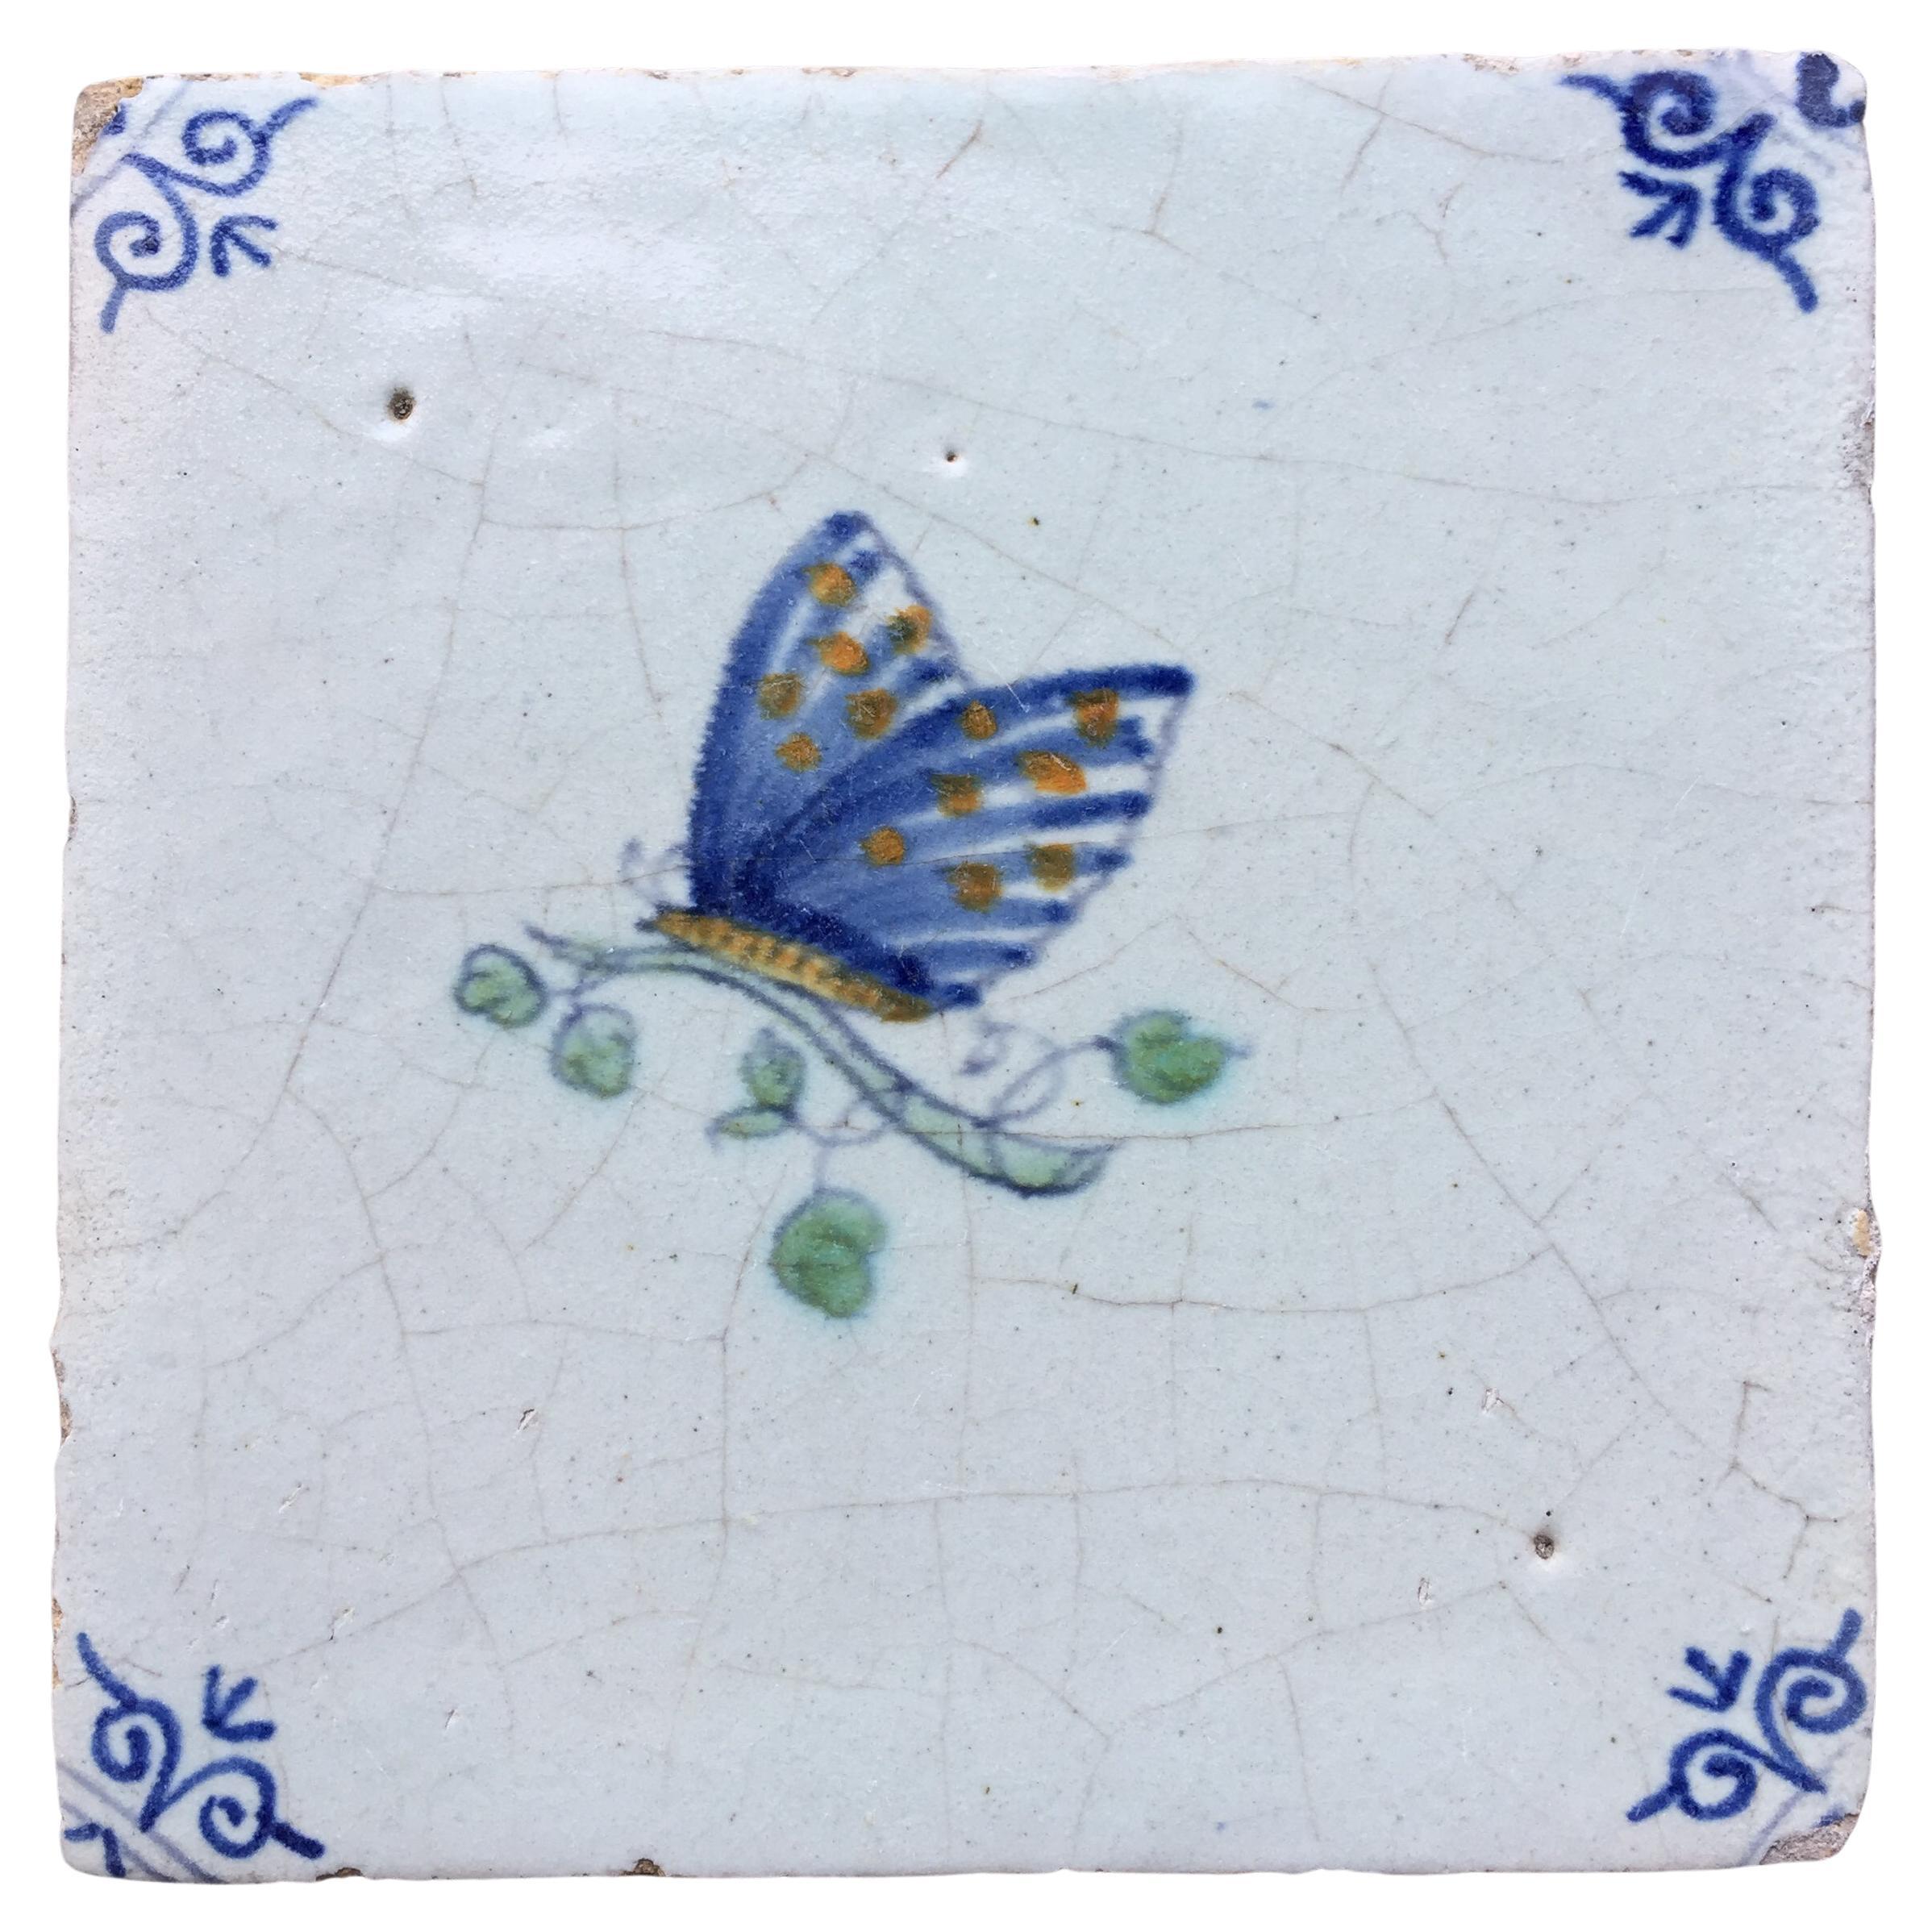 Blue and White Dutch Delft Tile with Butterfly, Mid 17th Century